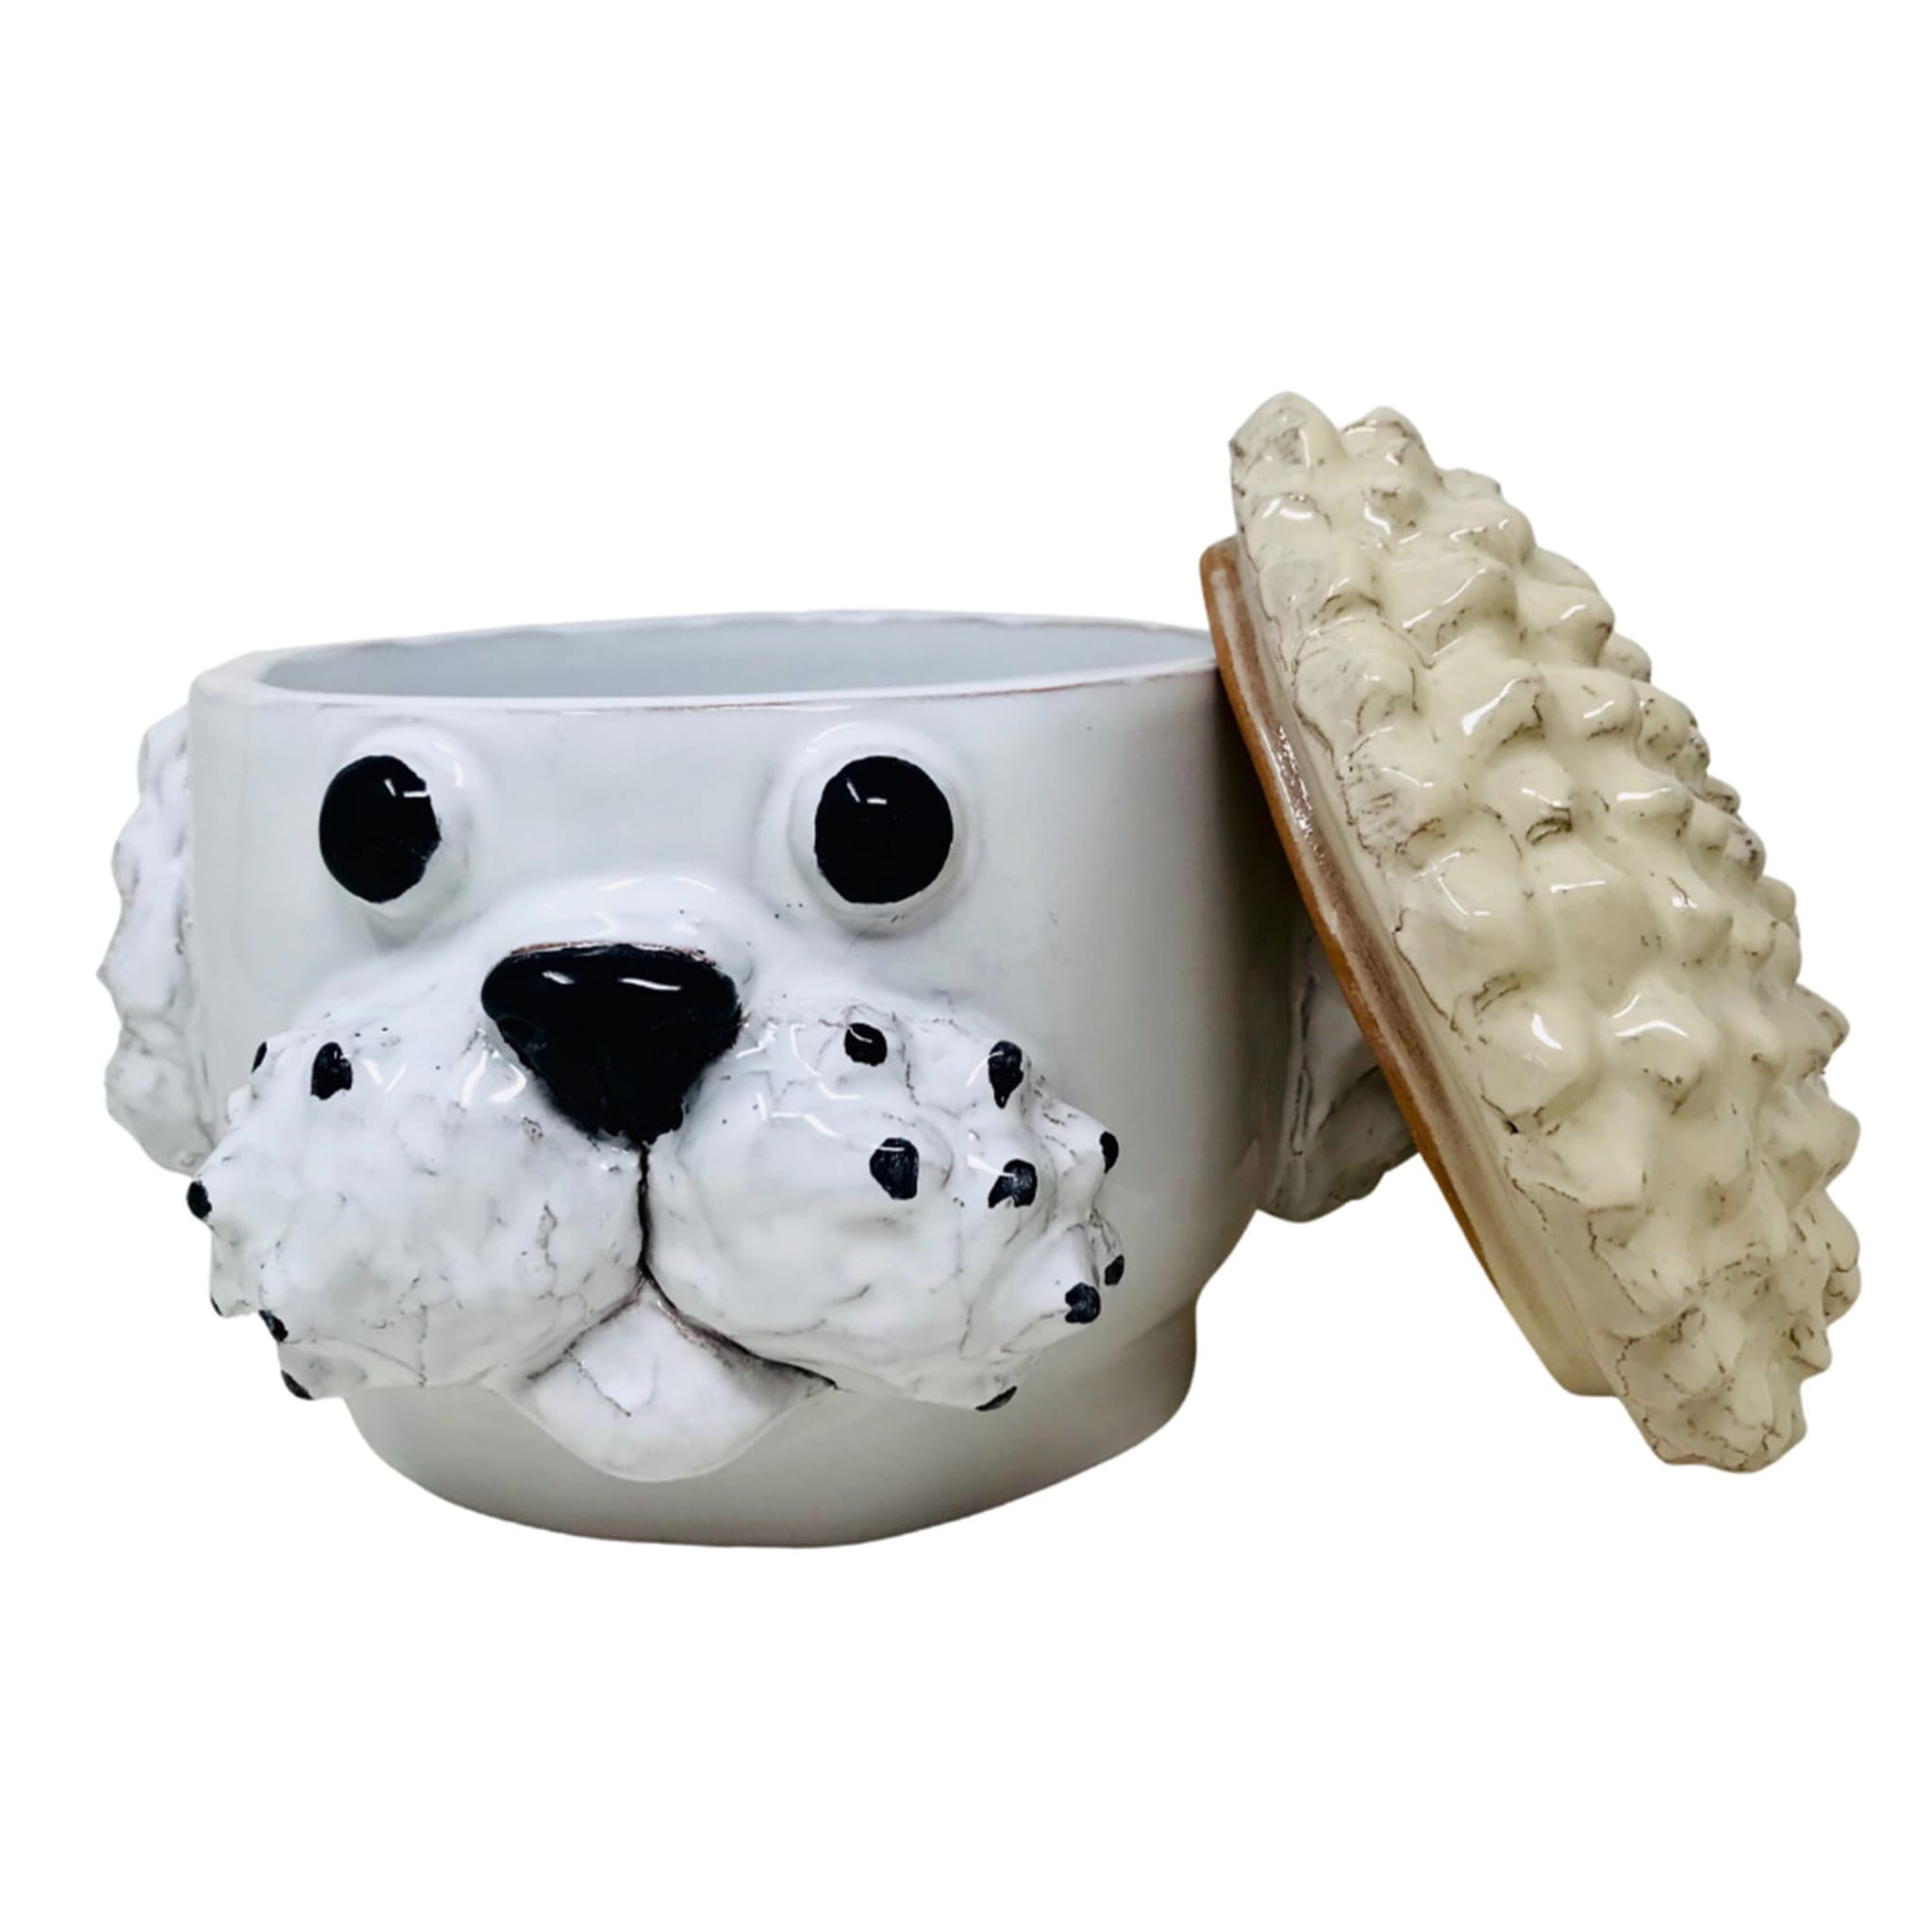 Small Cream and White Dog Container with Lid - Alternative view 1